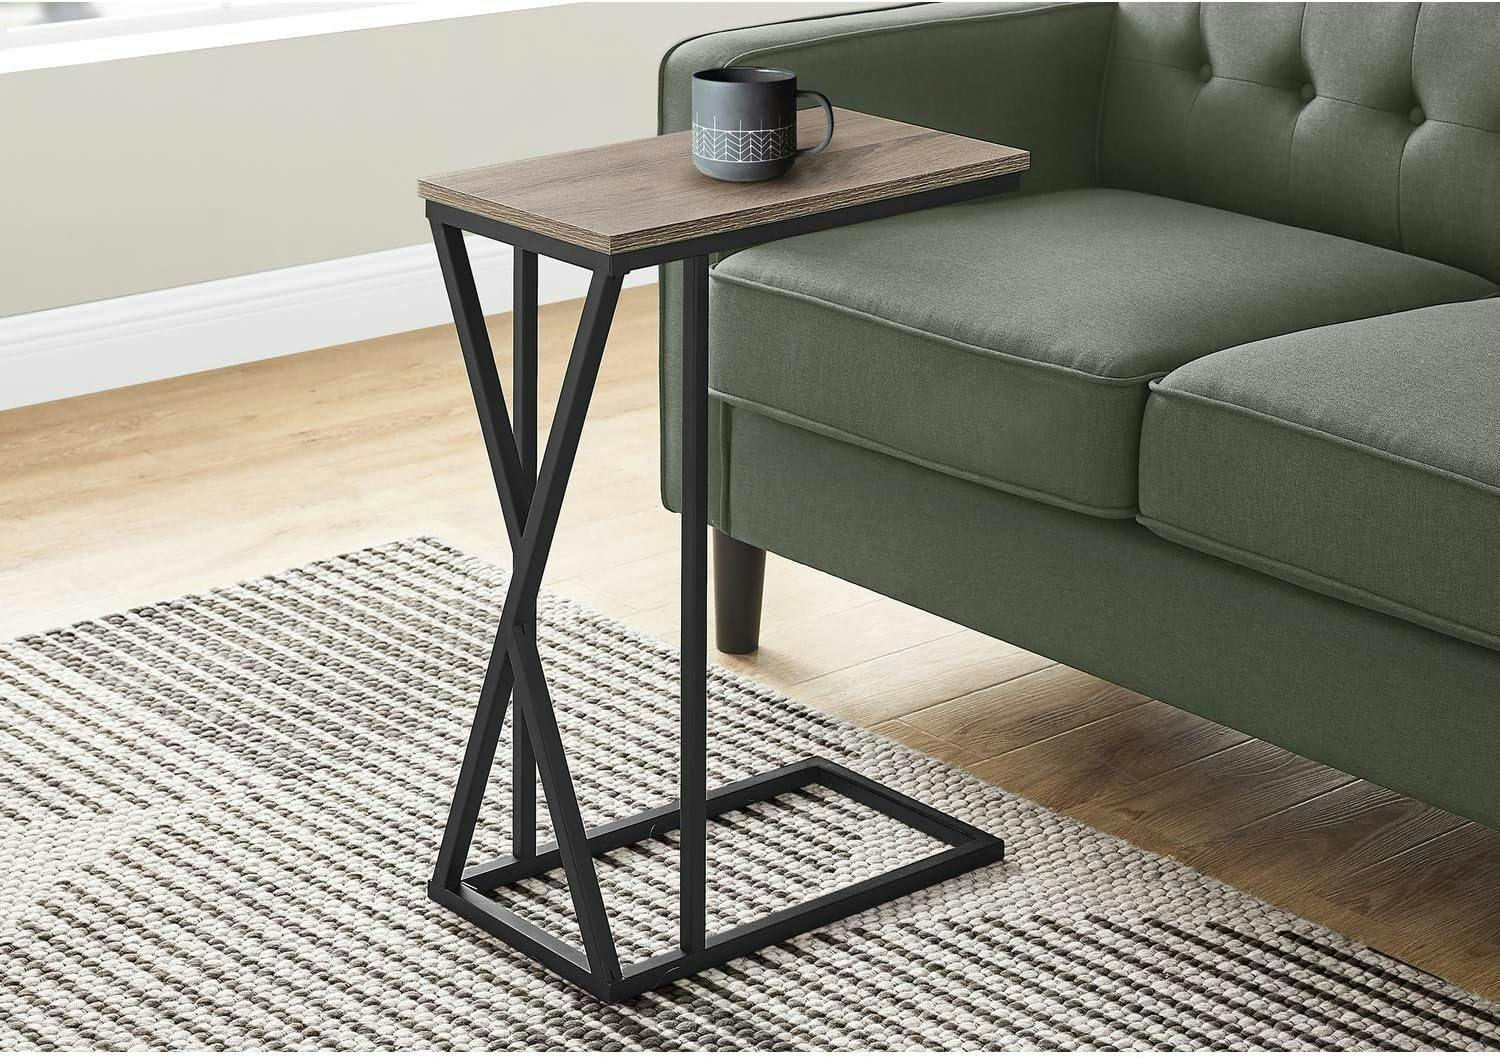 Modern Contemporary C-Shaped Black Metal & Woodgrain Accent Table